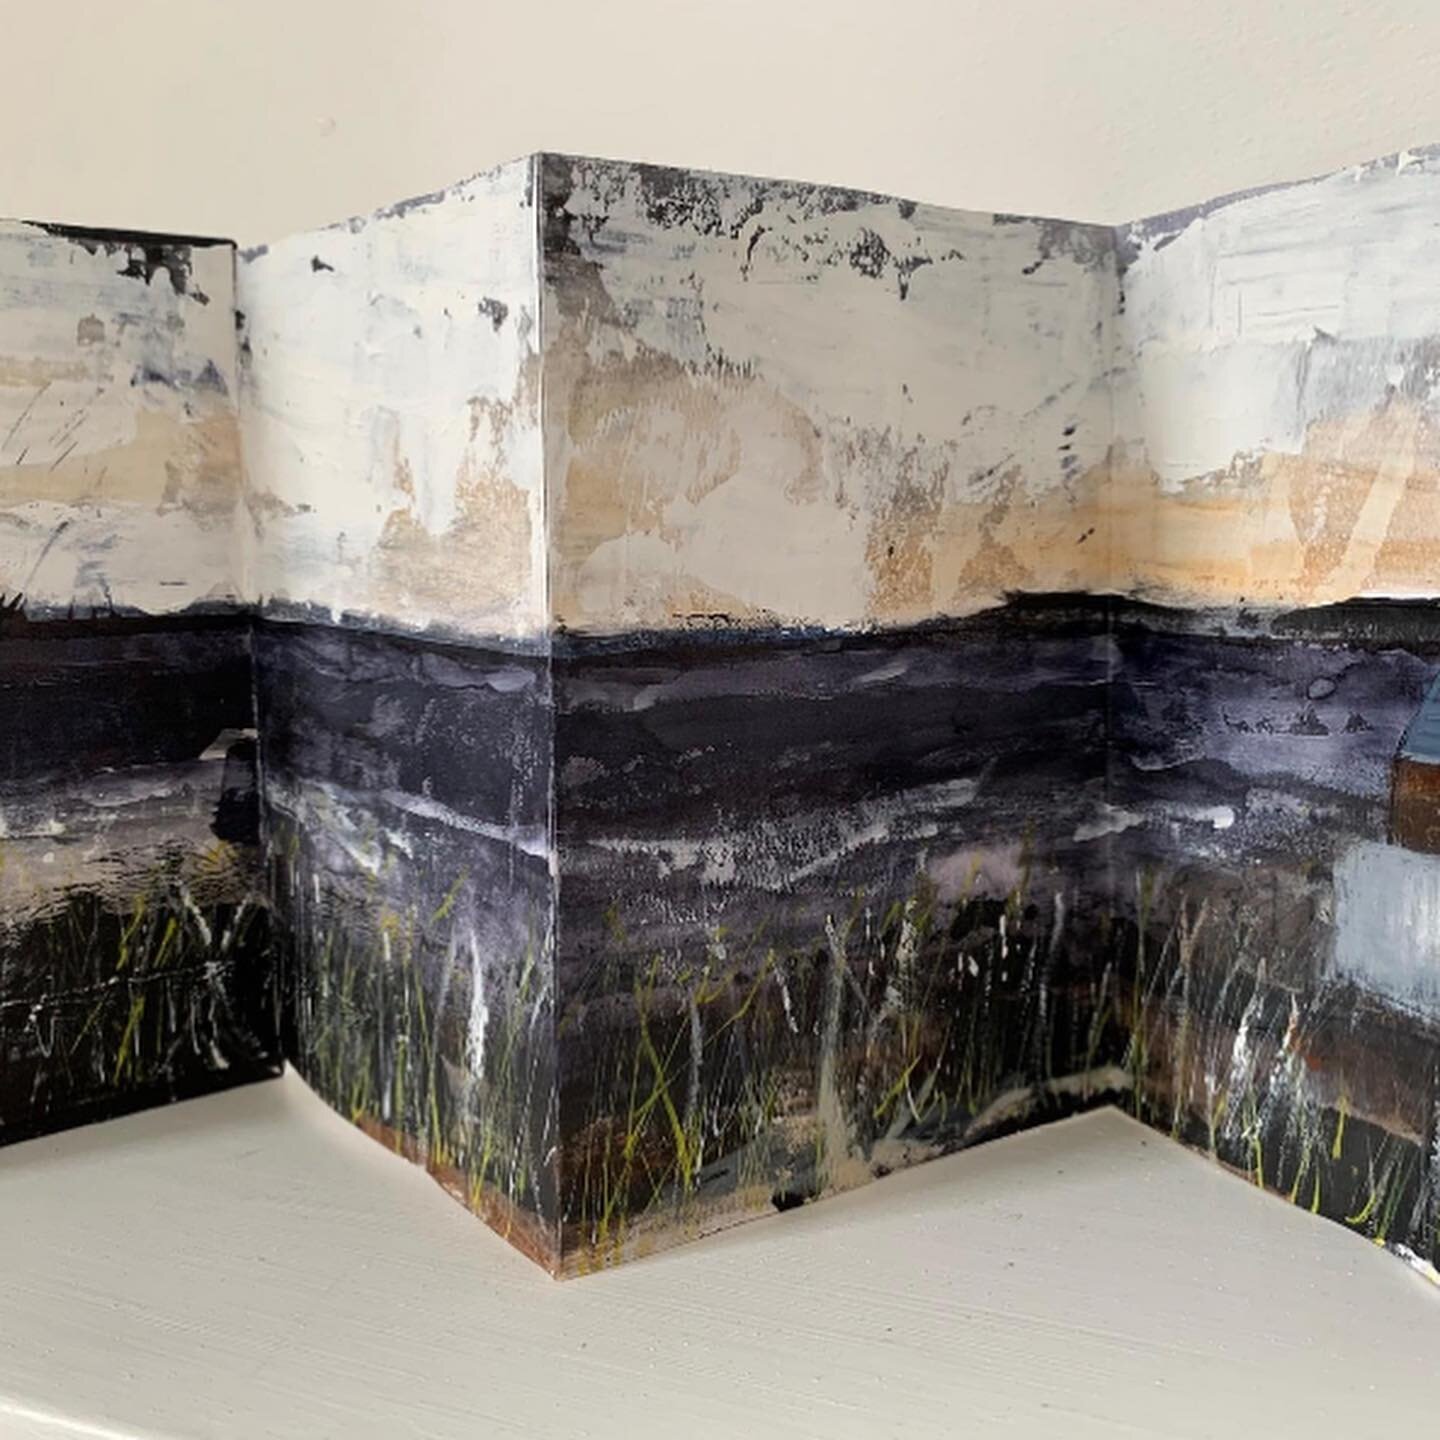 Really worth visiting this excellent exhibition at @fidrafineart in Gullane featuring the work of Dominique Cameron and Ann Cowan. Look at this stunning sketchbook of Winterfield by Ann.

There&rsquo;s some lovely paintings of Dunbar and of the cabin